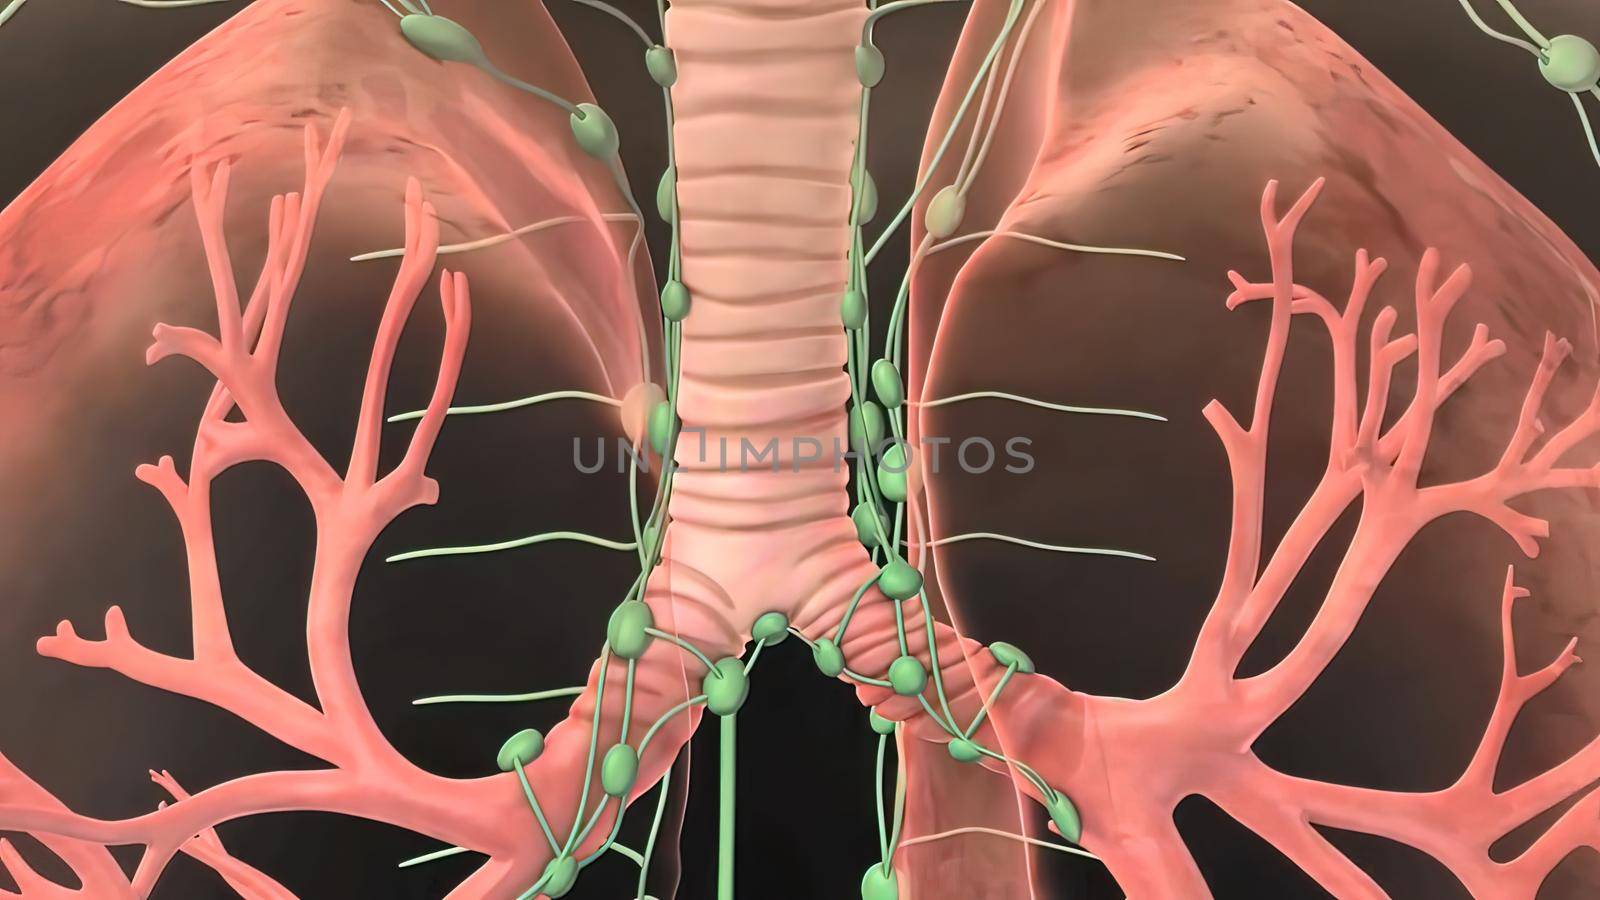 The lungs are a pair of spongy, air-filled organs located on either side of the chest . The trachea conducts inhaled air into the lungs through its tubular branches, called bronchi. 3D illustration